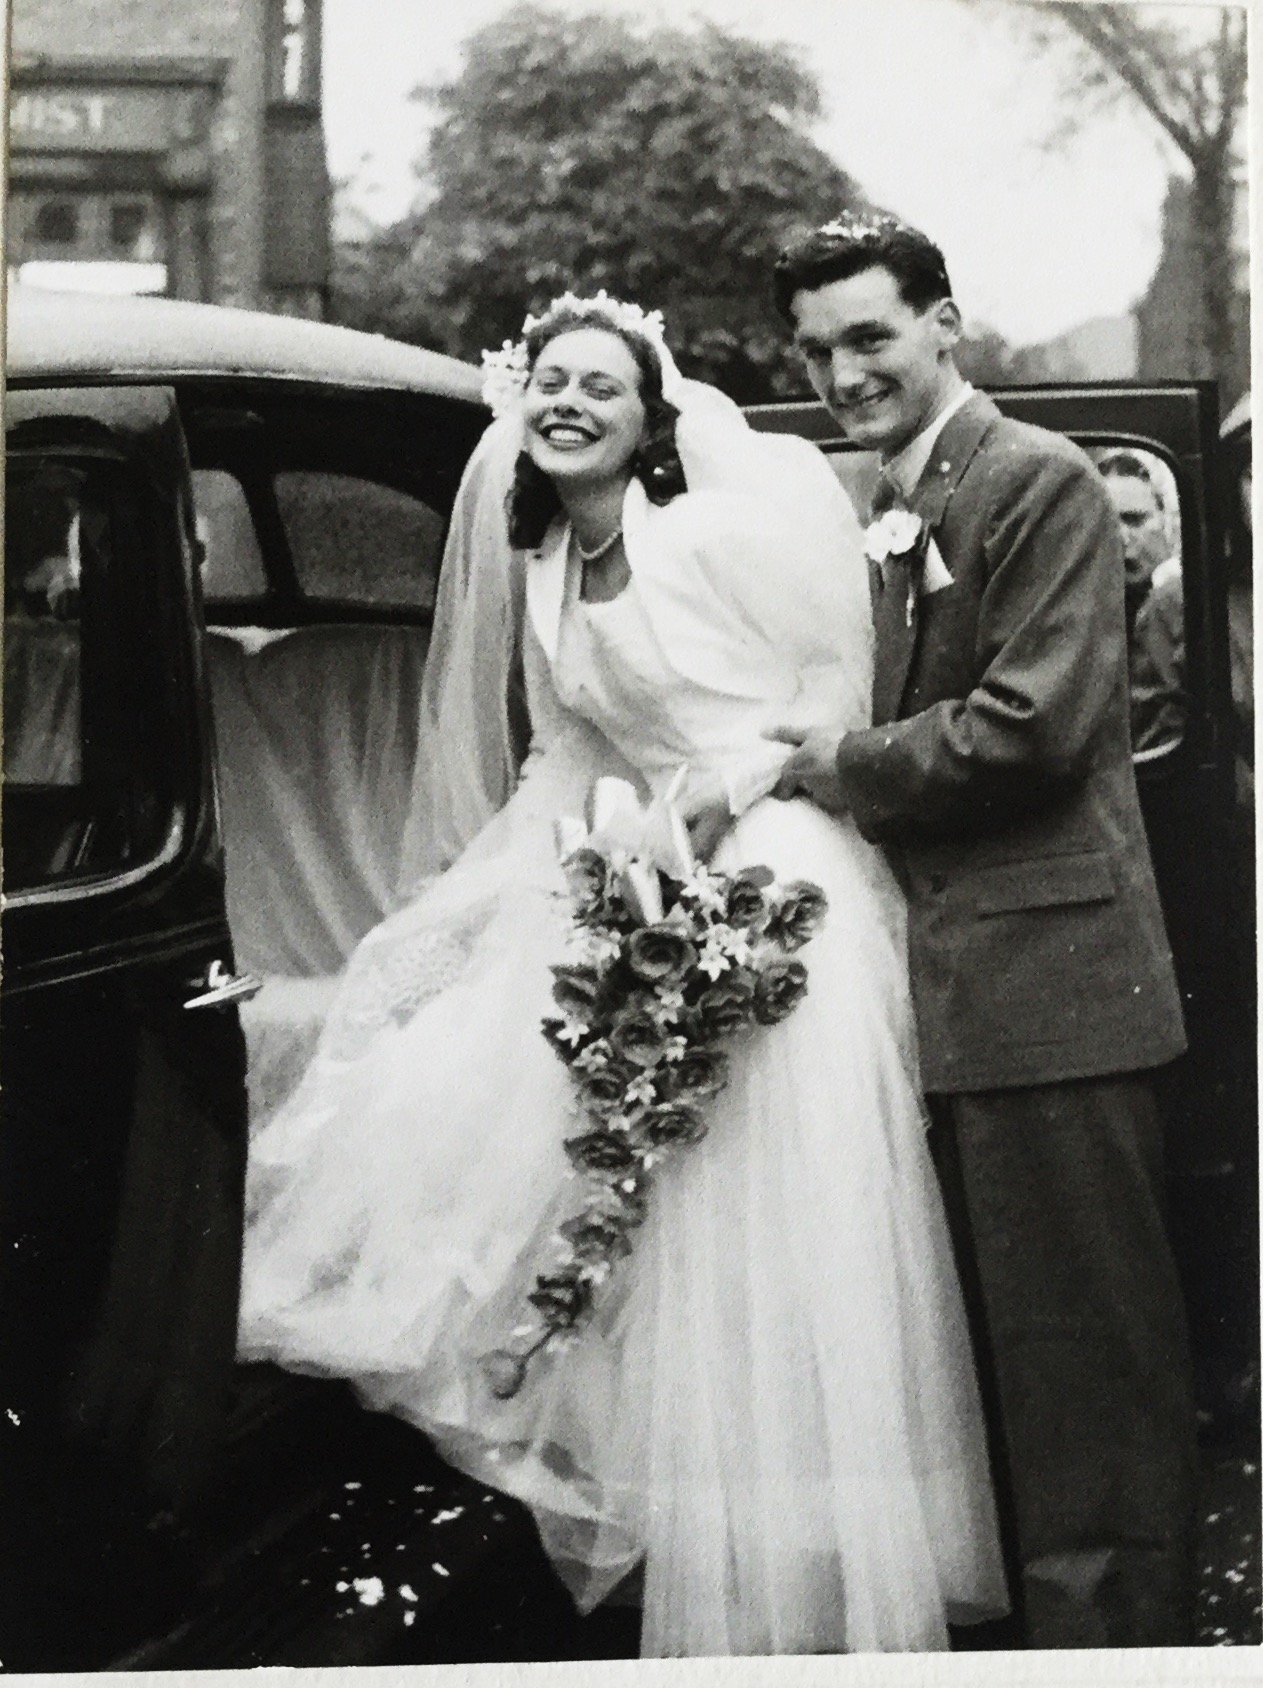 My wedding day 29th May 1954, rained all day but didn’t dampen our spirits.